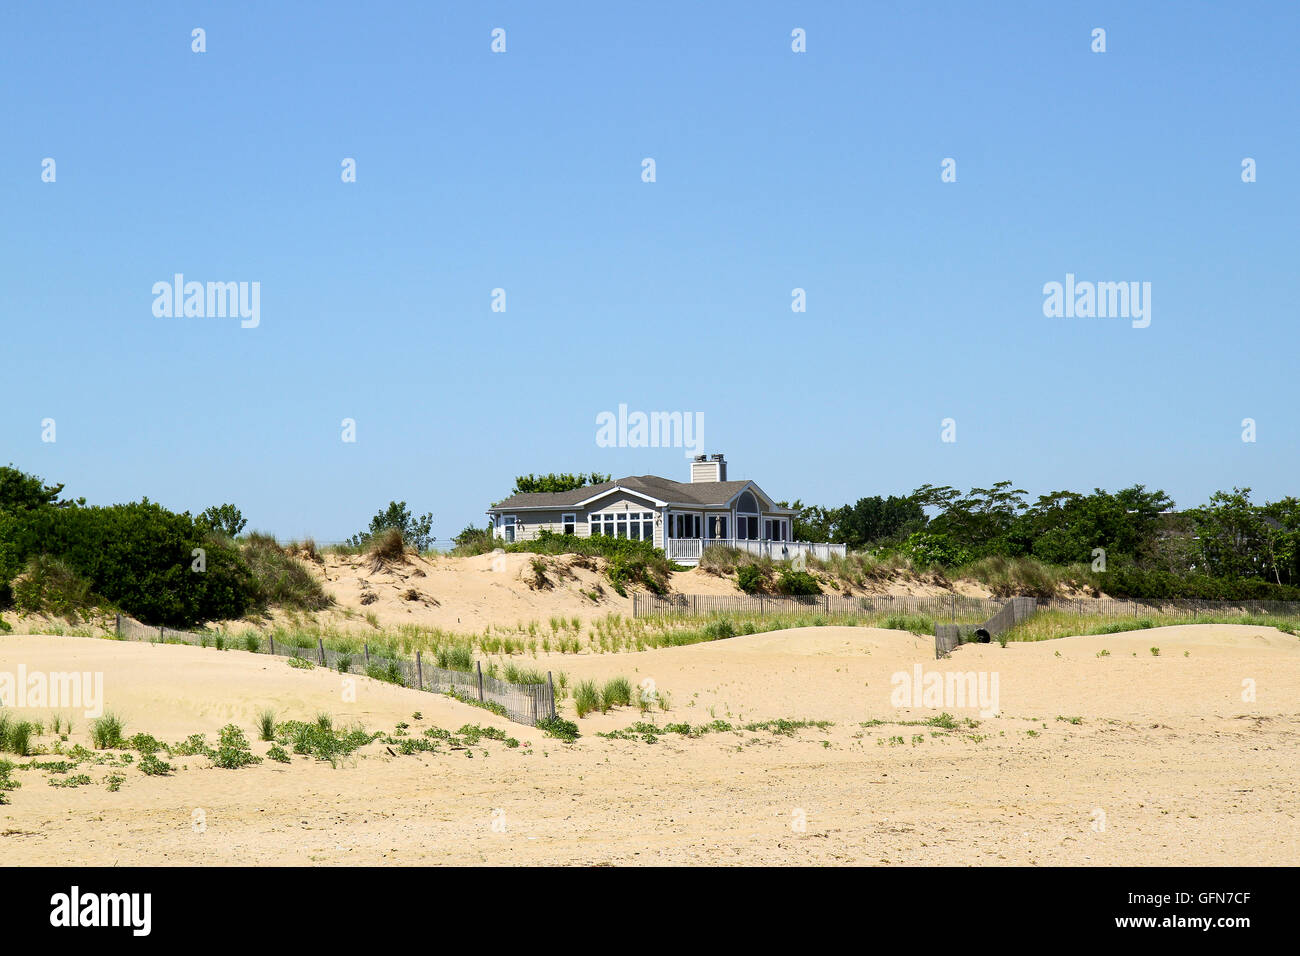 A house overlooking the beach at Bayshore Waterfront Park, Port Monmouth, New Jersey Stock Photo